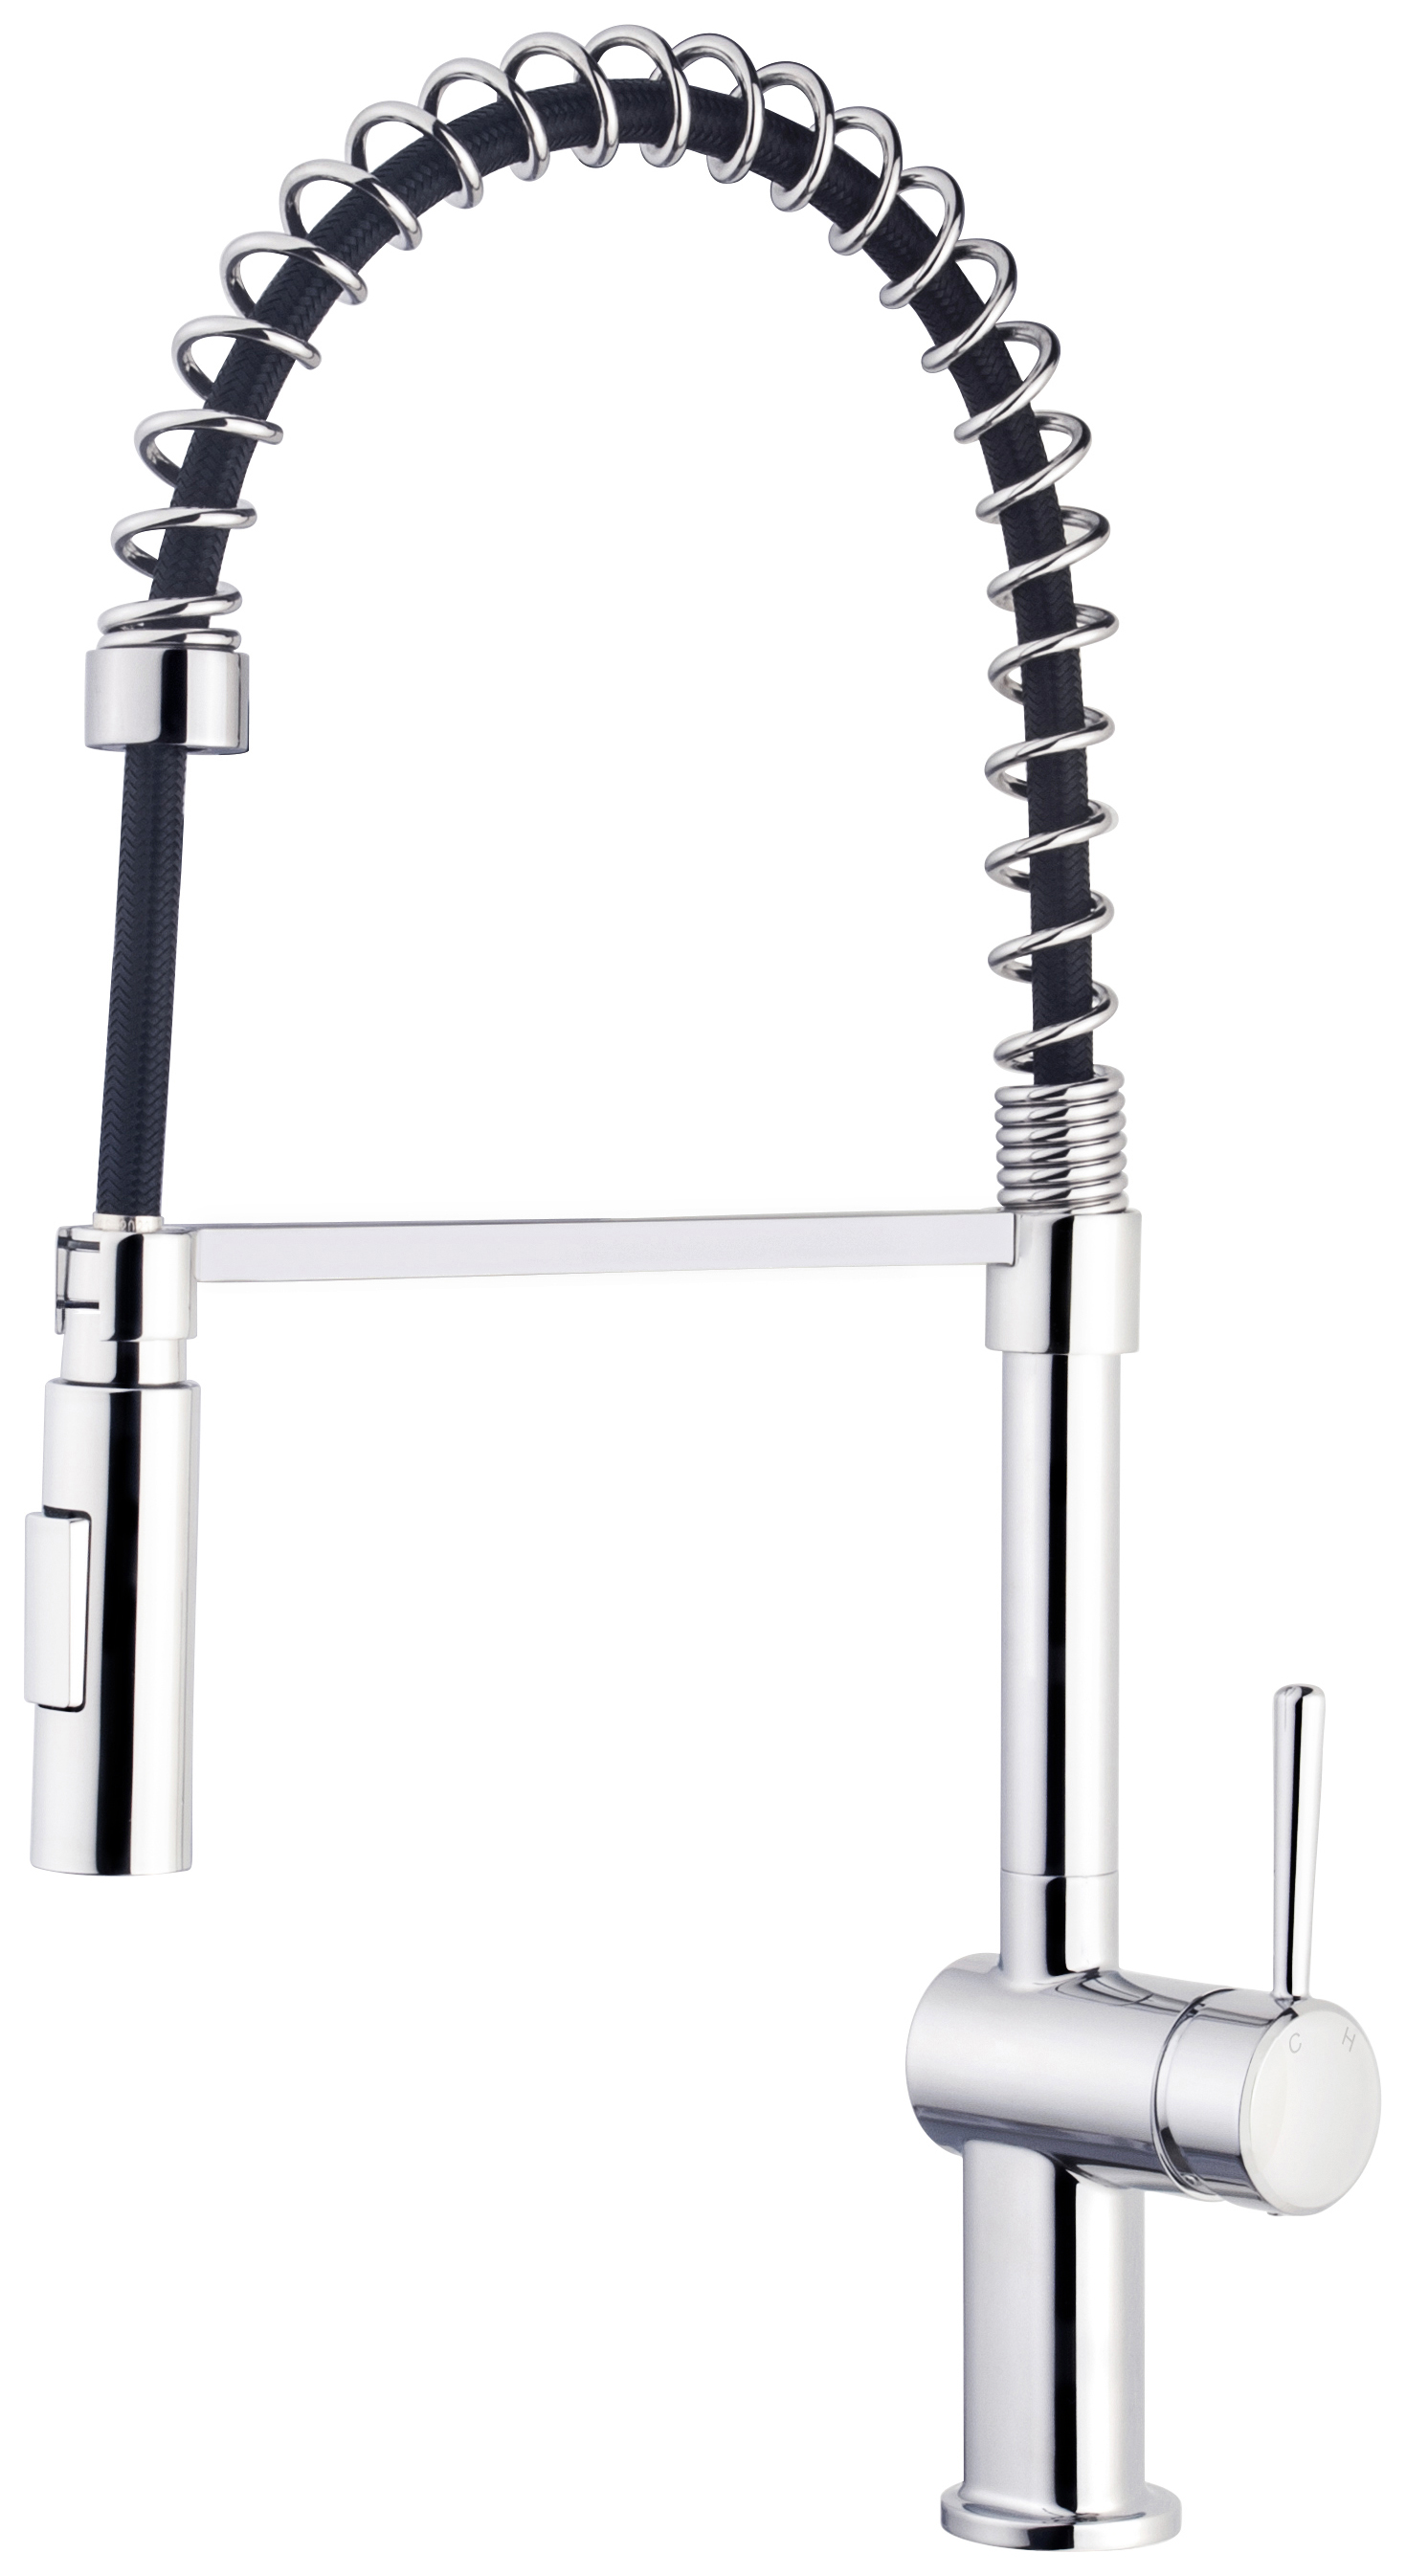 Image of Wickes Savannah Pull Out Tap - Chrome